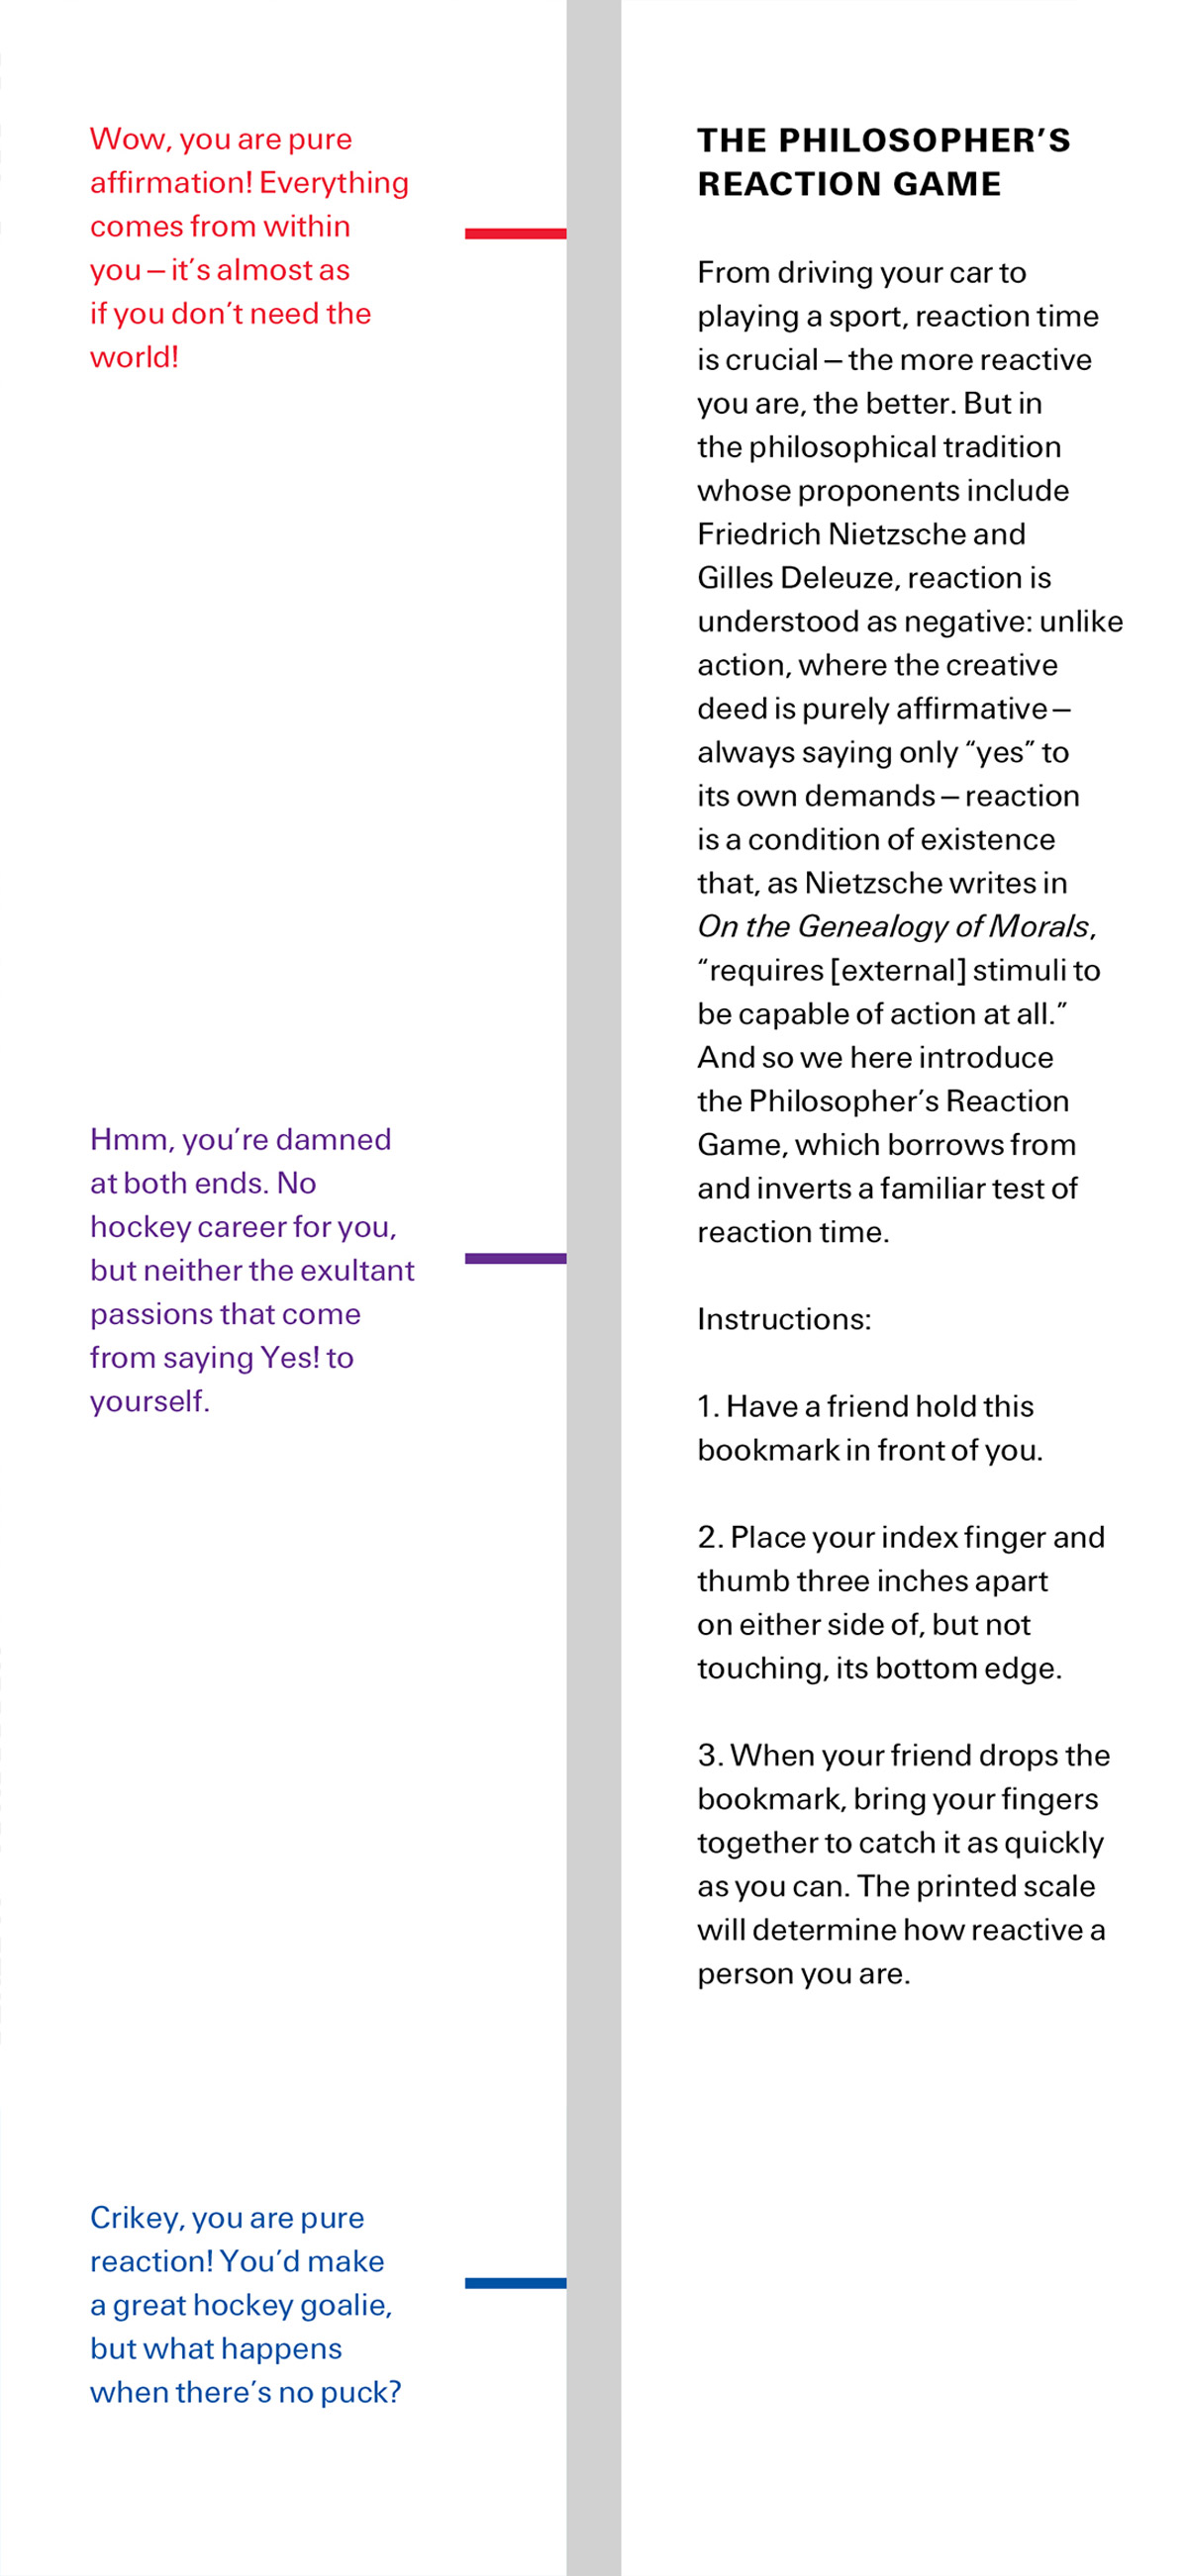 The front and back of this issue’s bookmark. The front side shows different points on a reaction scale. The back side reads: “THE PHILOSOPHER’S REACTION GAME. From driving your car to playing a sport, reaction time is crucial—the more reactive you are, the better. But in
the philosophical tradition whose proponents include Friedrich Nietzsche and Gilles Deleuze, reaction is understood as negative: unlike action, where the creative deed is purely affirmative— always saying only “yes” to its own demands—reaction is a condition of existence that, as Nietzsche writes in “On the Genealogy of Morals”, “requires [external] stimuli to be capable of action at all.” And so we here introduce the Philosopher’s Reaction Game, which borrows from and inverts a familiar test of reaction time. Instructions: 1. Have a friend hold this bookmark in front of you. 2. Place your index finger and thumb three inches apart on either side of, but not touching, its bottom edge. 3. When your friend drops the bookmark, bring your fingers together to catch it as quickly as you can. The printed scale will determine how reactive a person you are.”